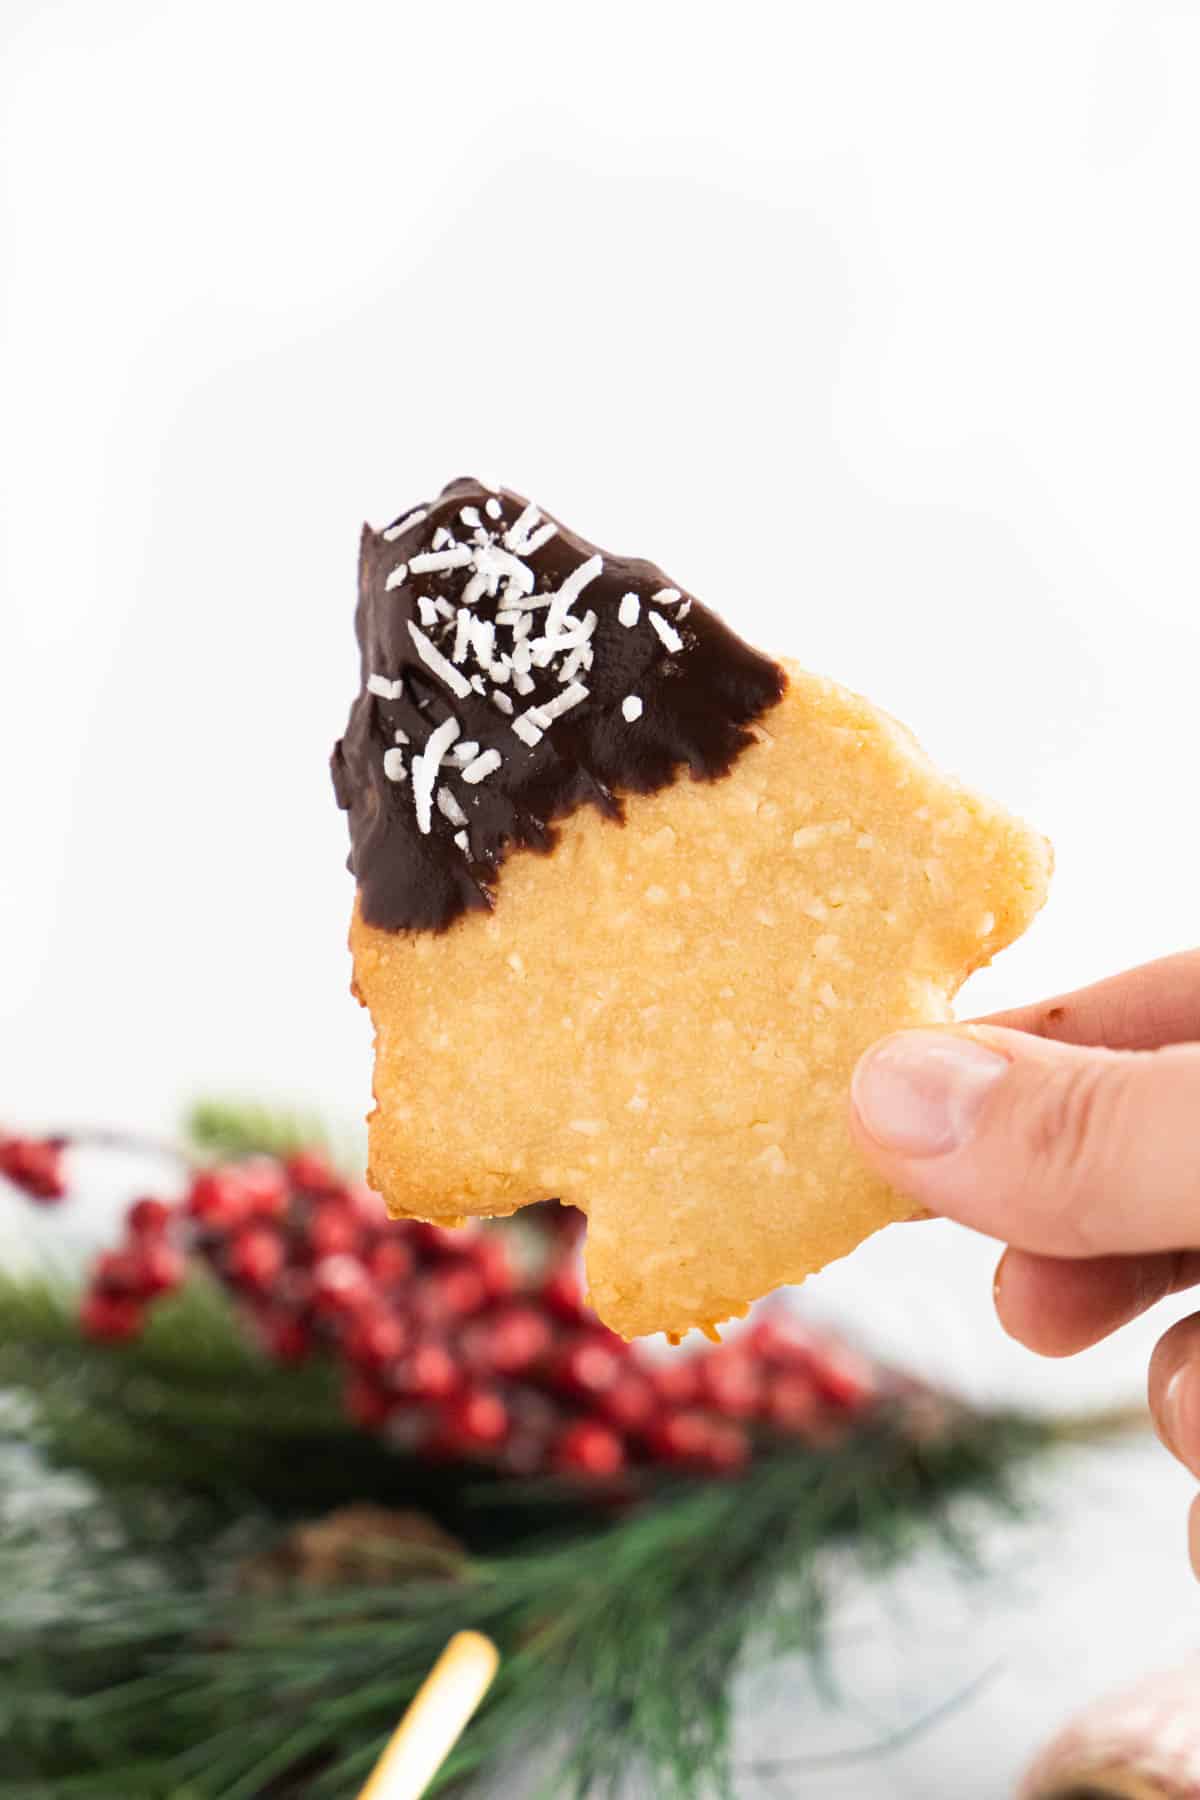 hand holding a tree shaped cookie dipped in chocolate with shredded coconut on top.